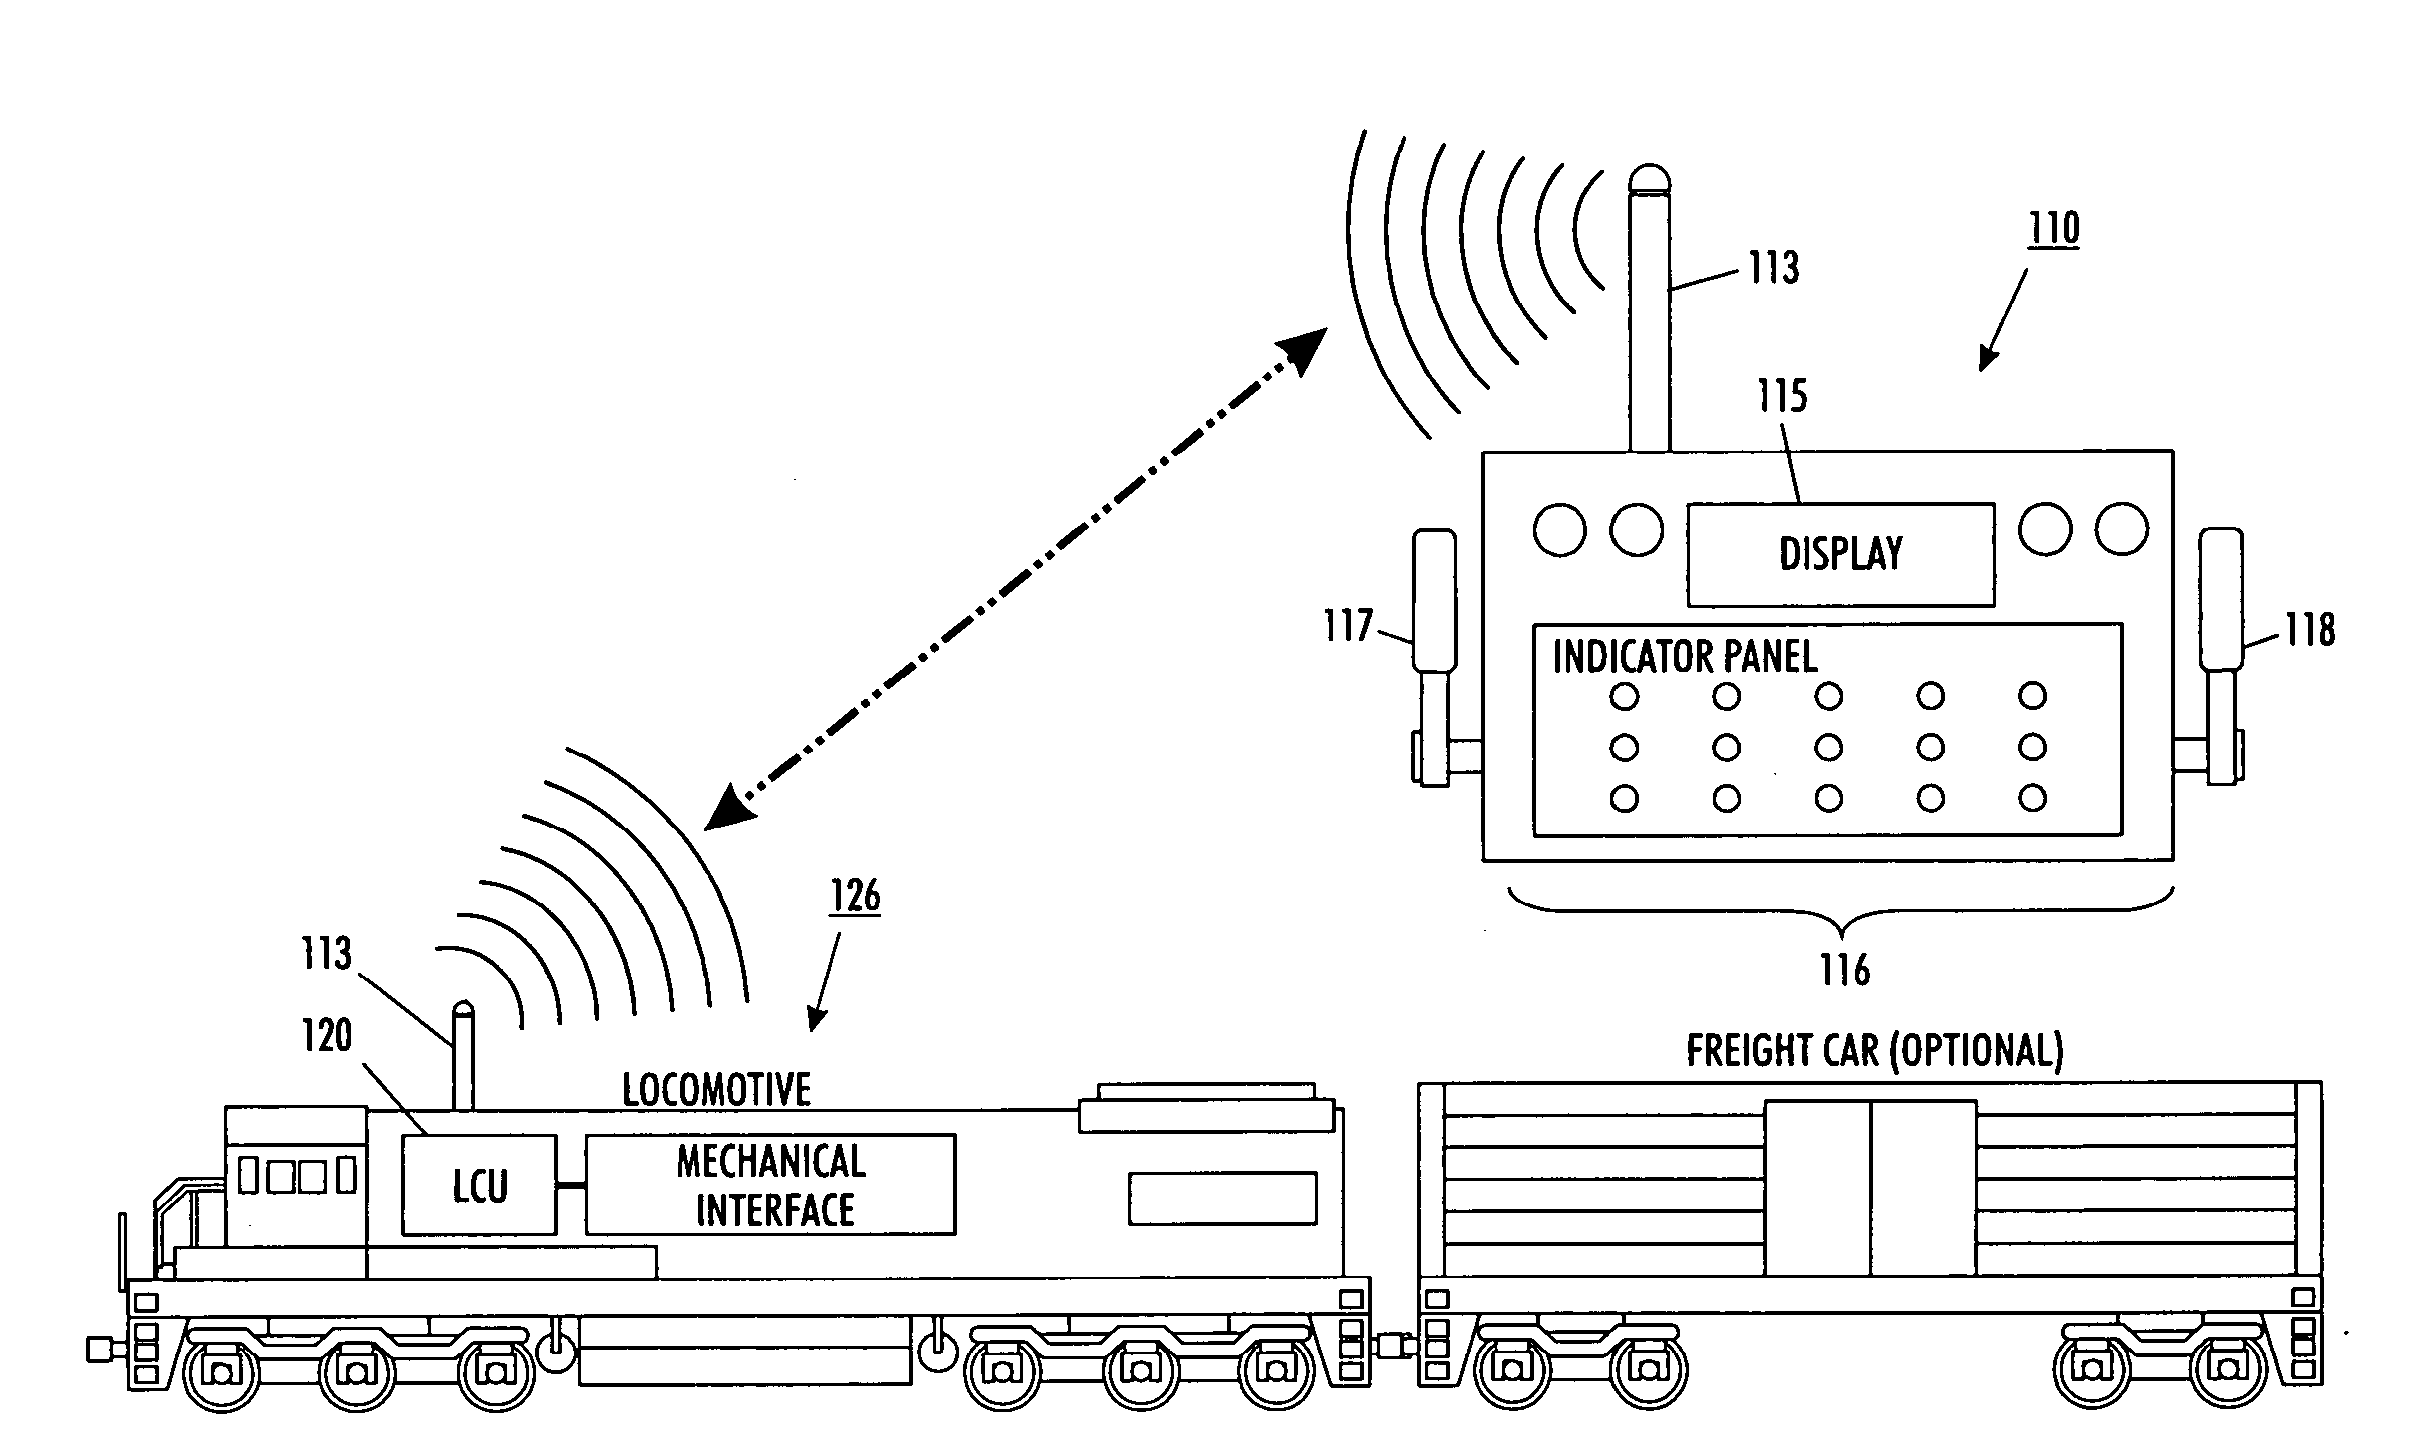 System and method for remote control of locomotives